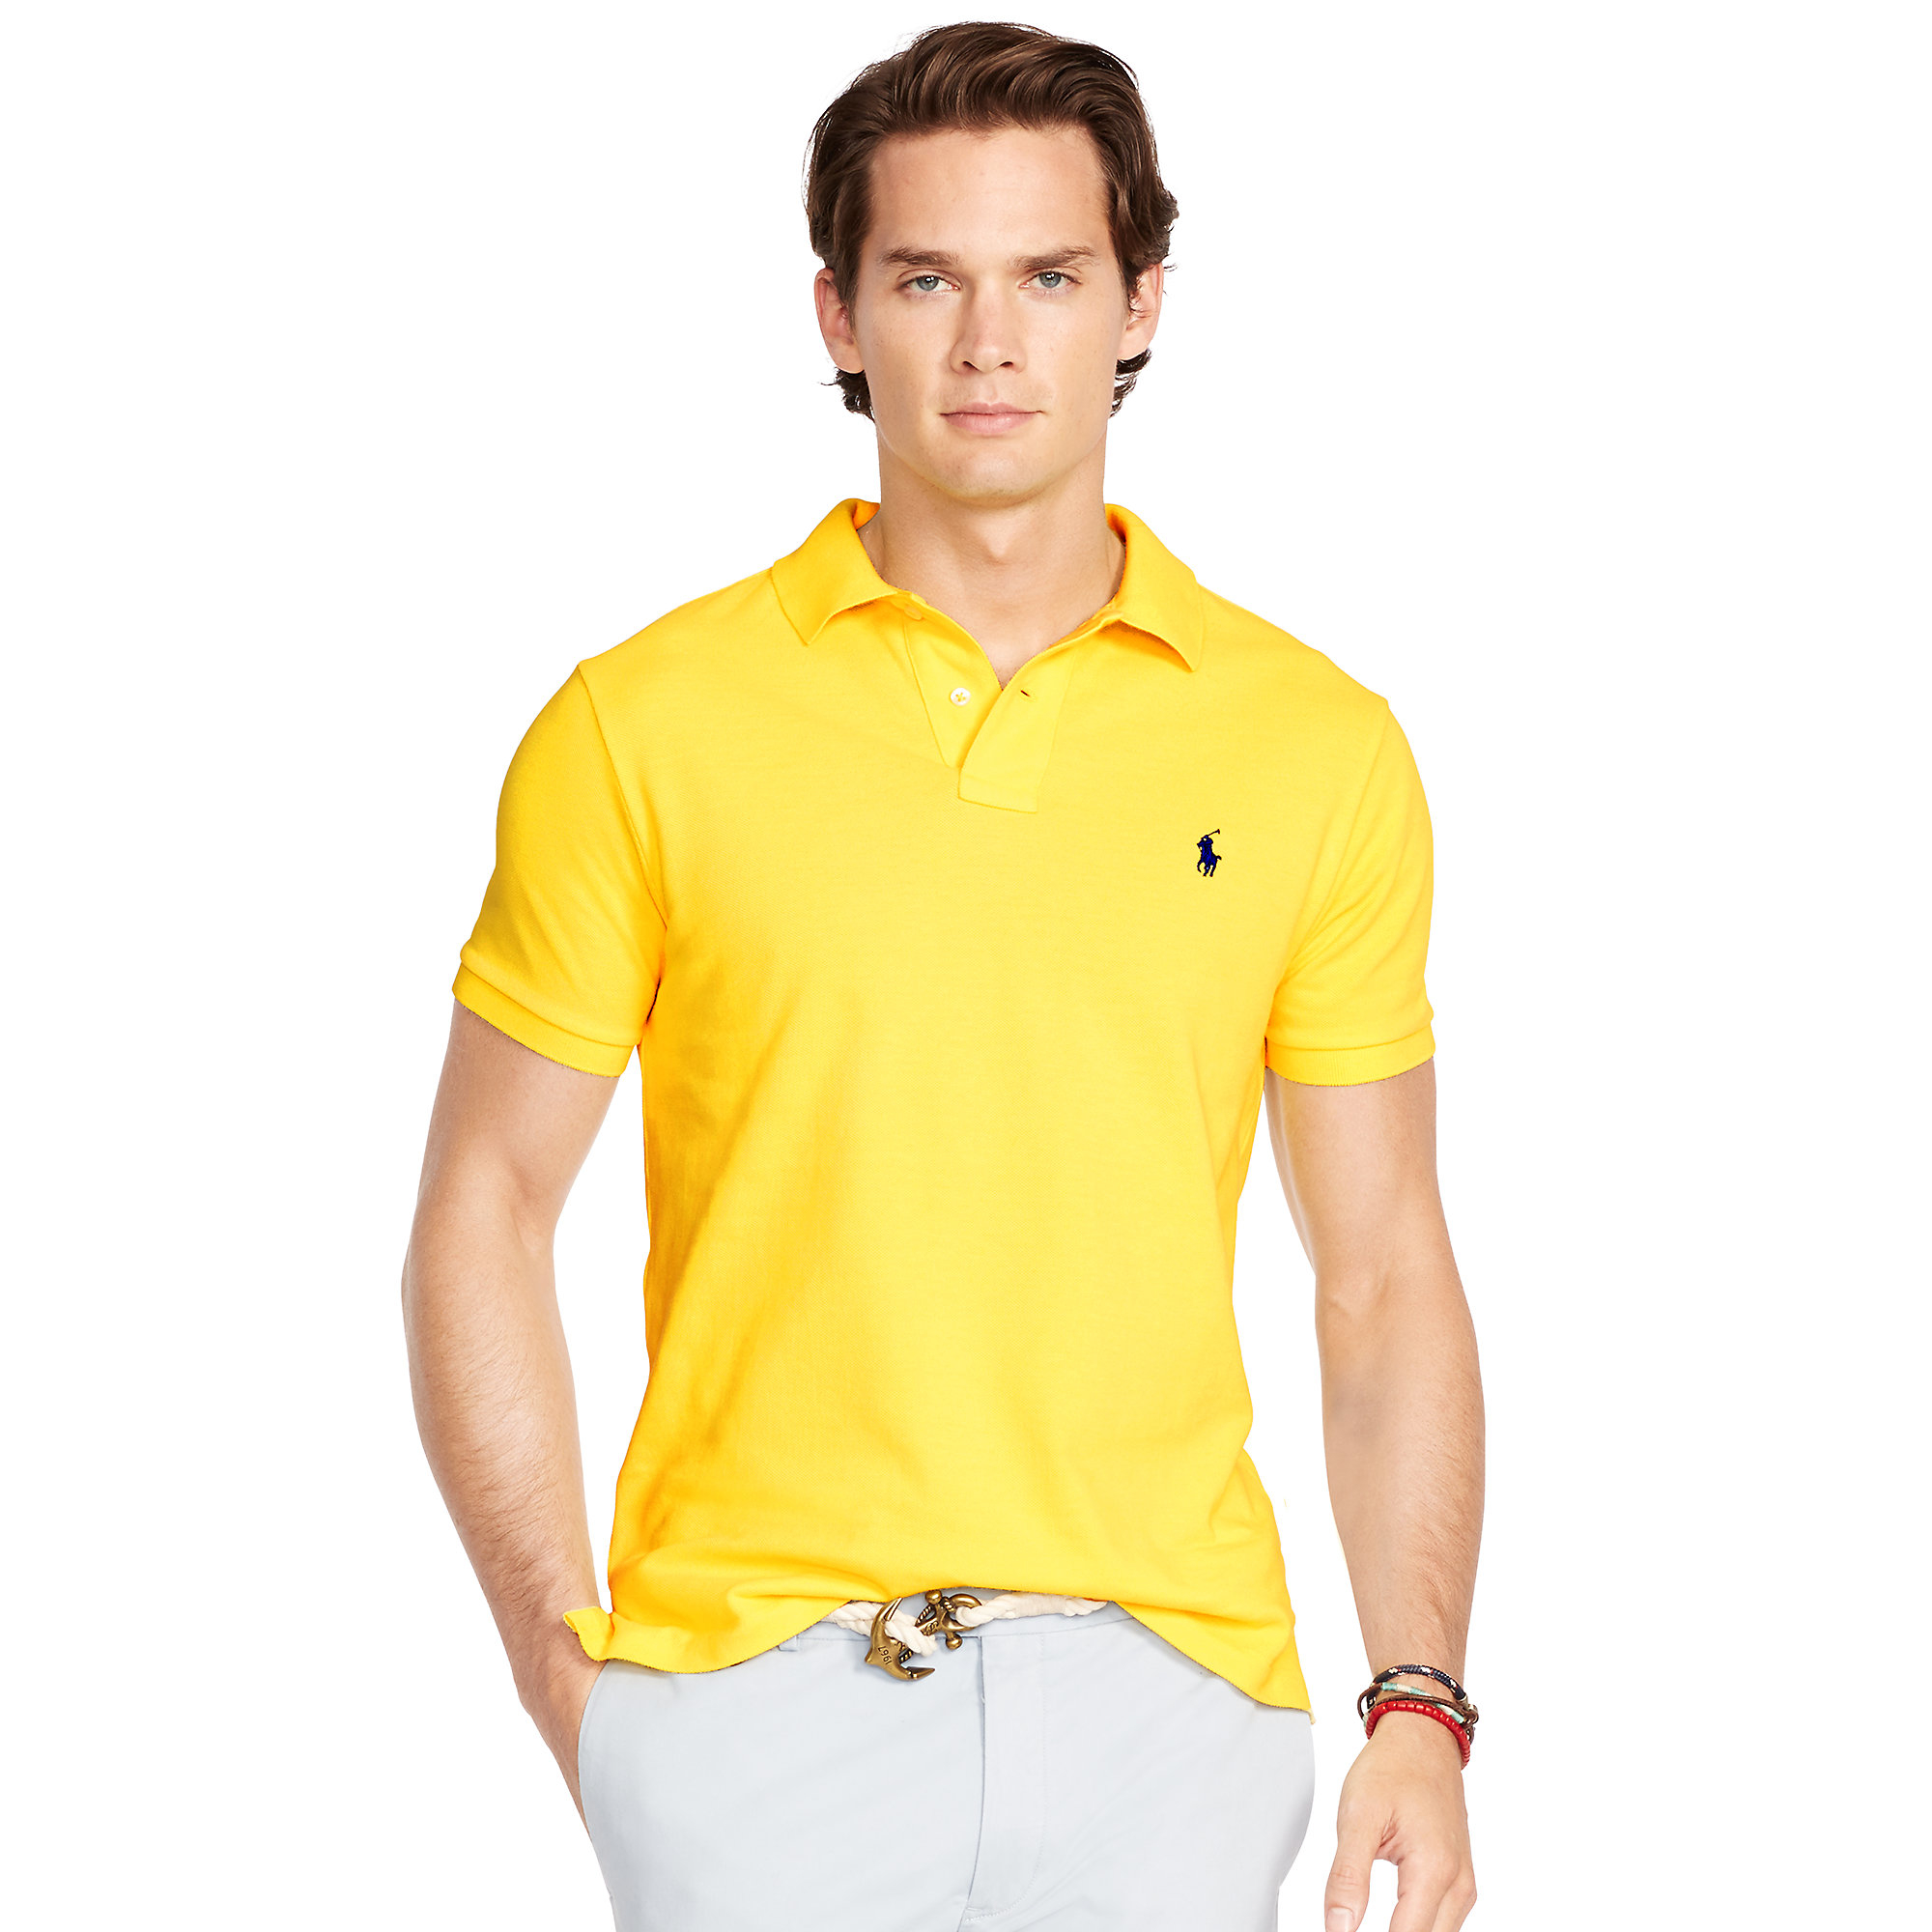 Polo Ralph Lauren Cotton Slim-fit Mesh Polo Shirt in Yellow for Men - Lyst